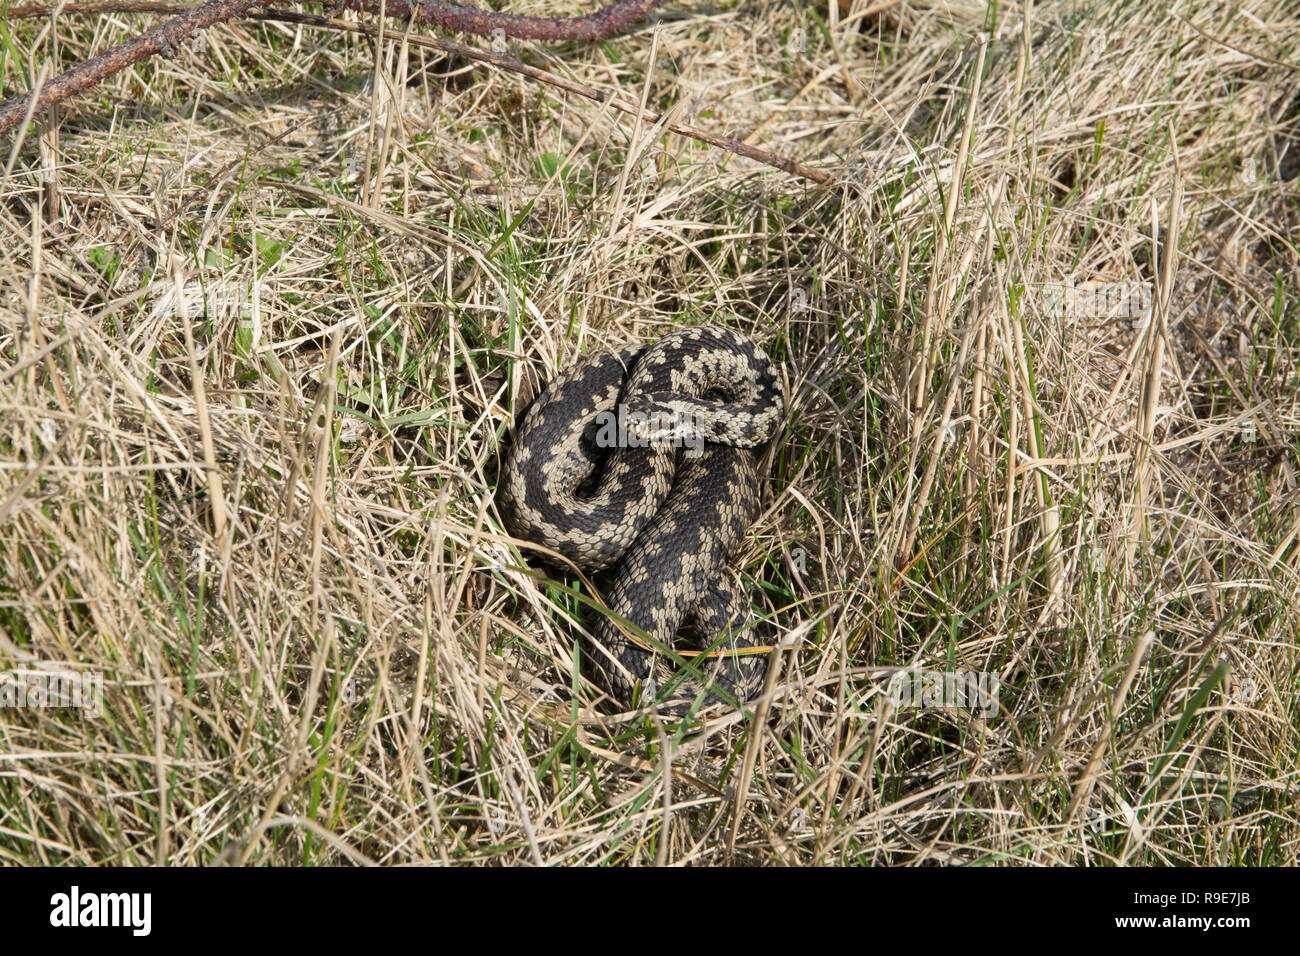 Adder snake coiled up in grass Stock Photo